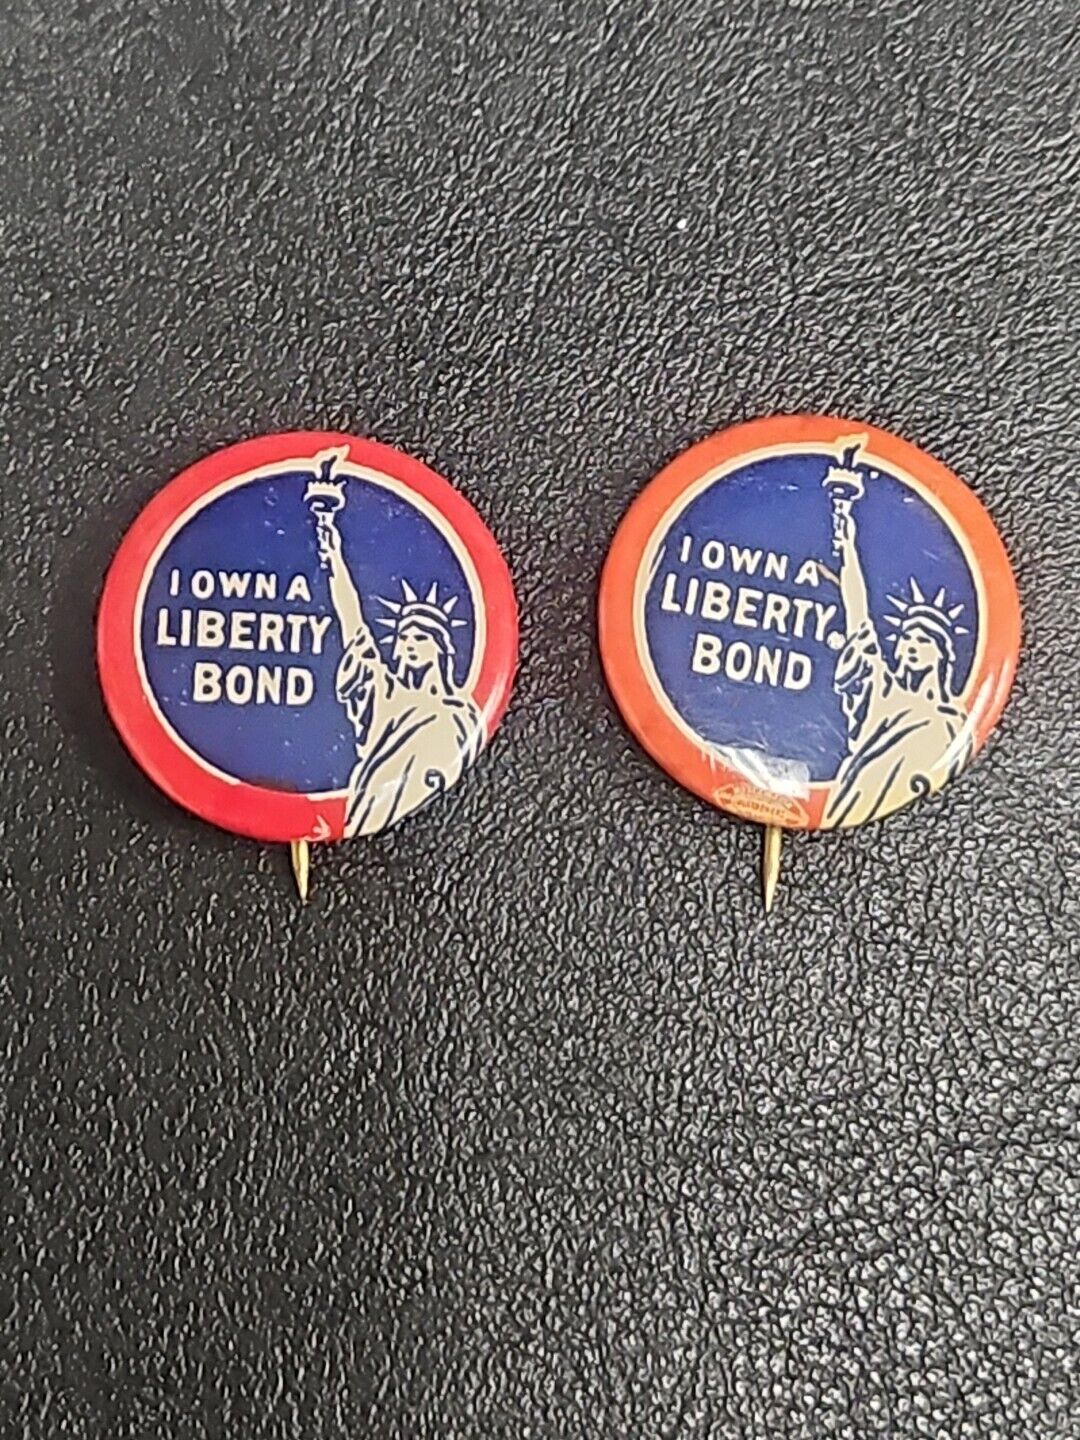 2-WWI - I OWN A LIBERTY BOND  Statue of Liberty - political campaign button pin 